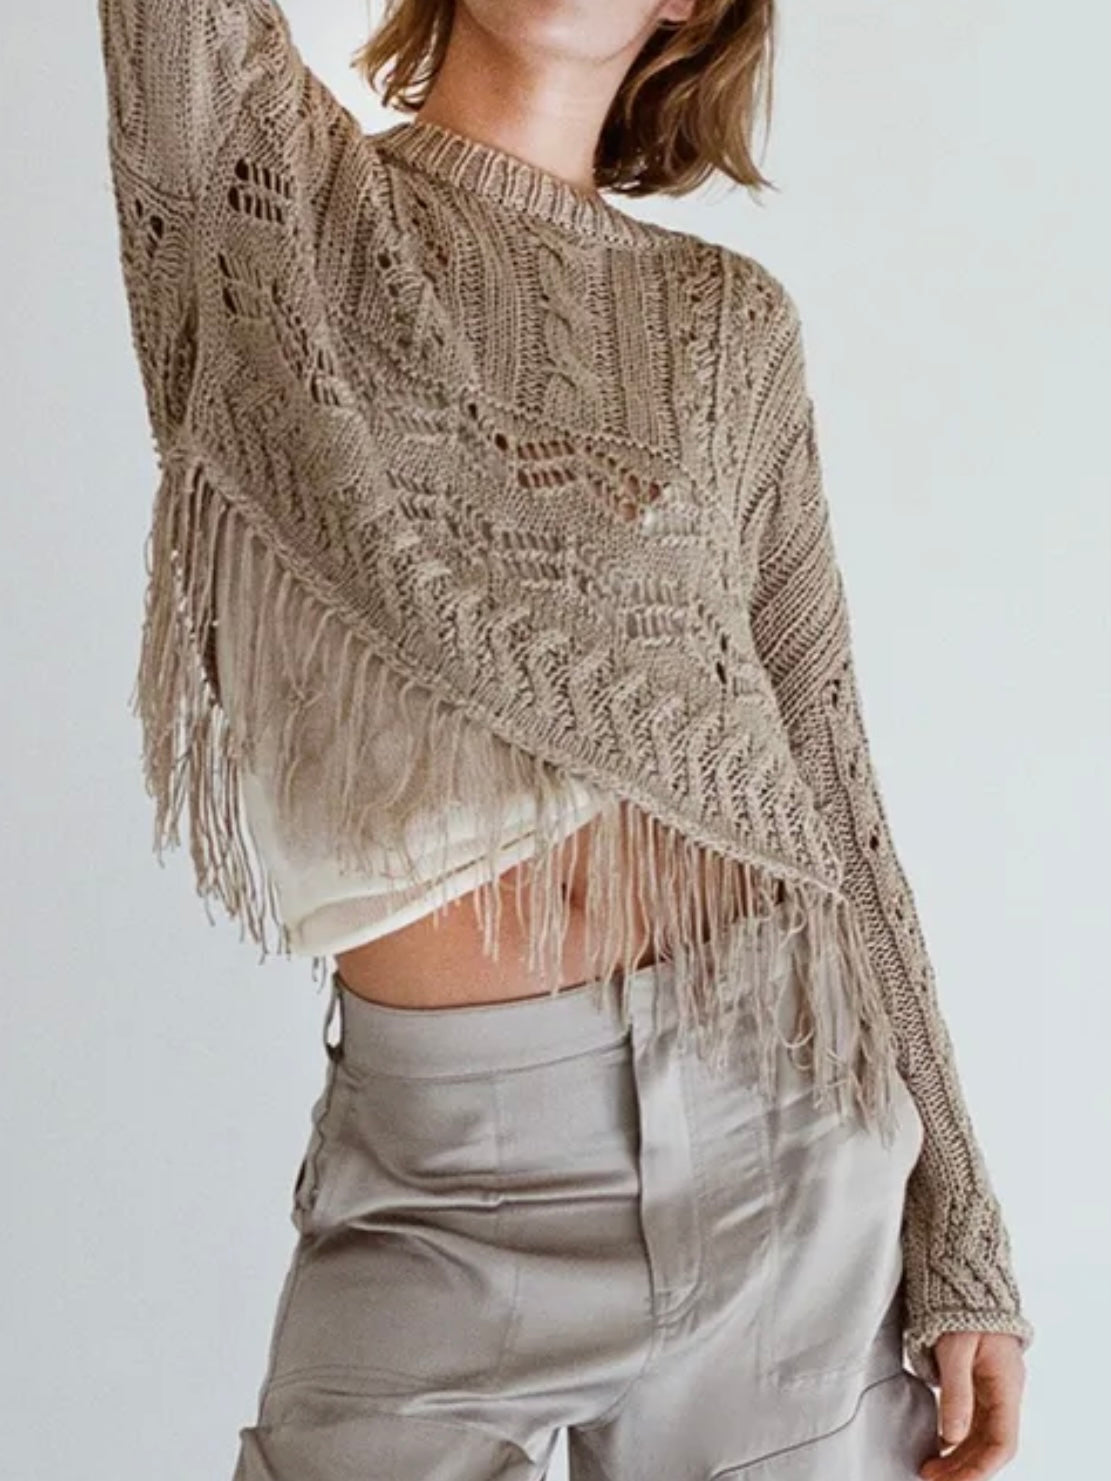 Beige embroidered texture sweater